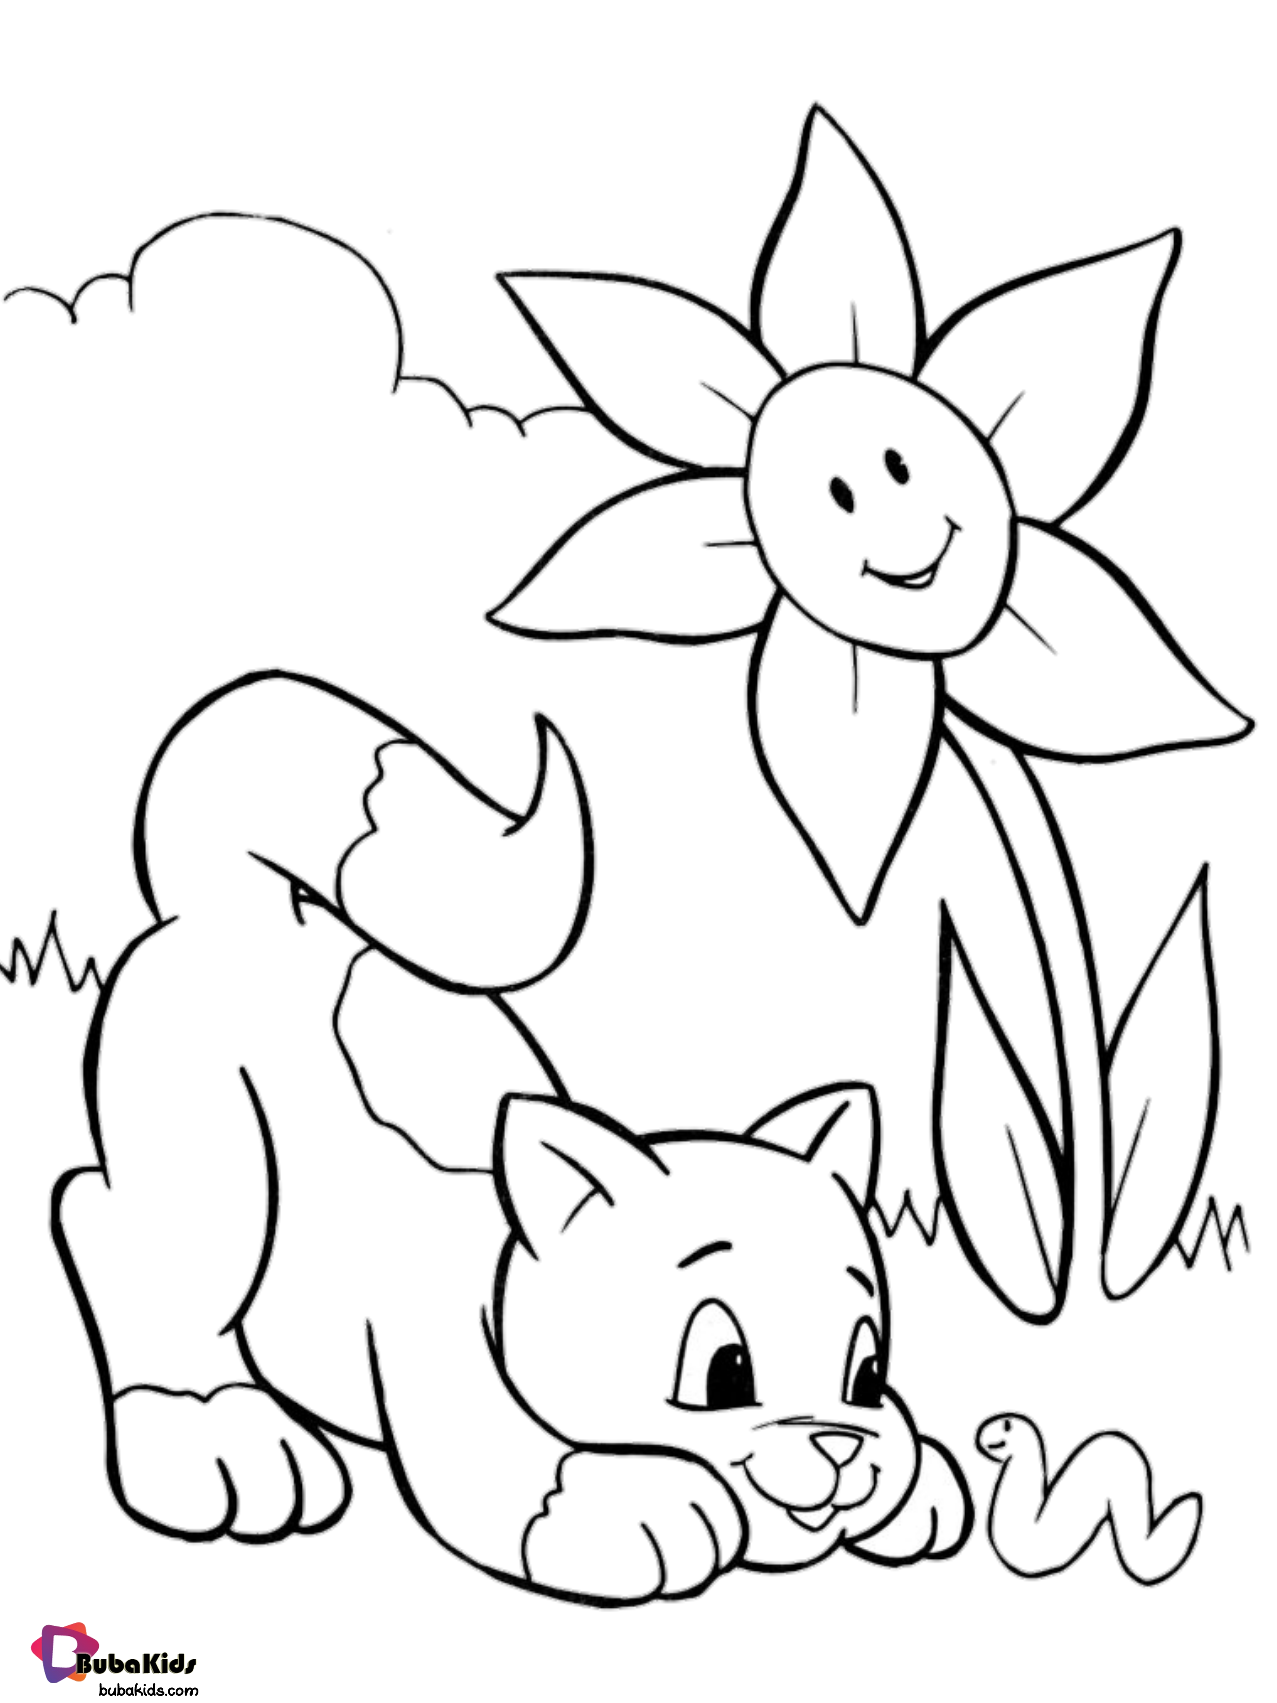 Simple and easy coloring page for toddlers Wallpaper